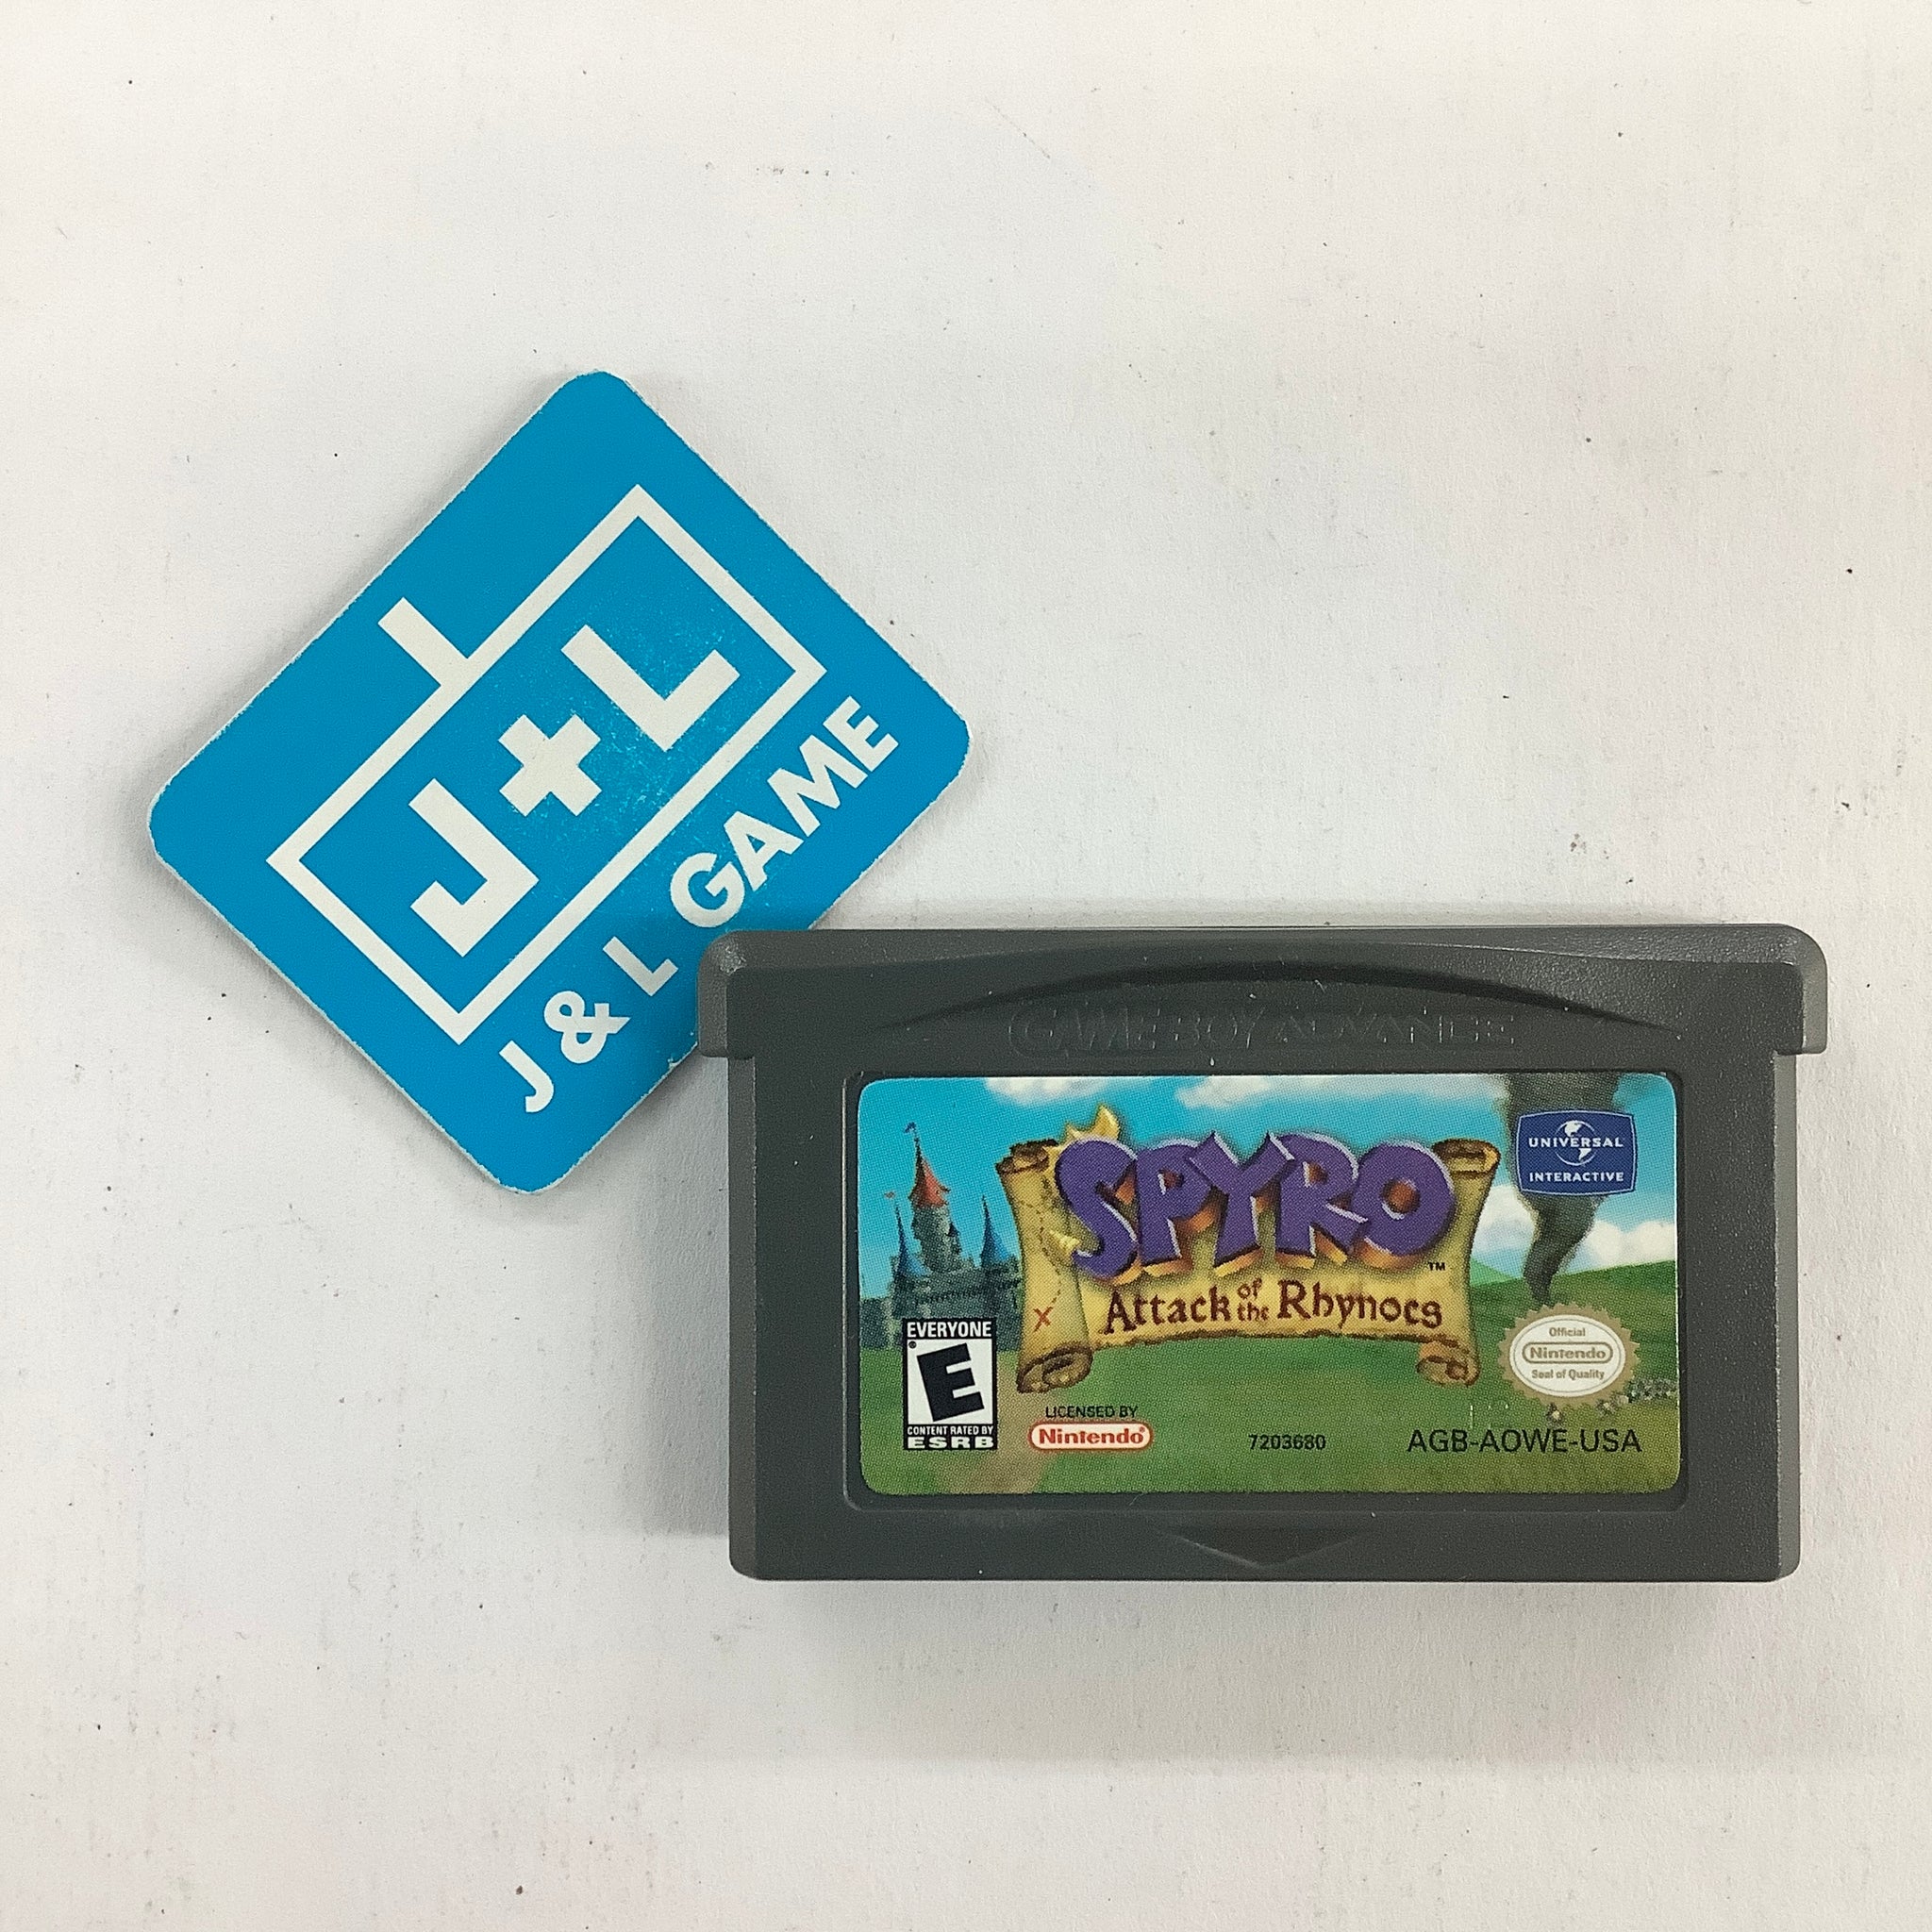 Spyro: Attack of the Rhynocs - (GBA) Game Boy Advance [Pre-Owned] Video Games Universal Interactive   